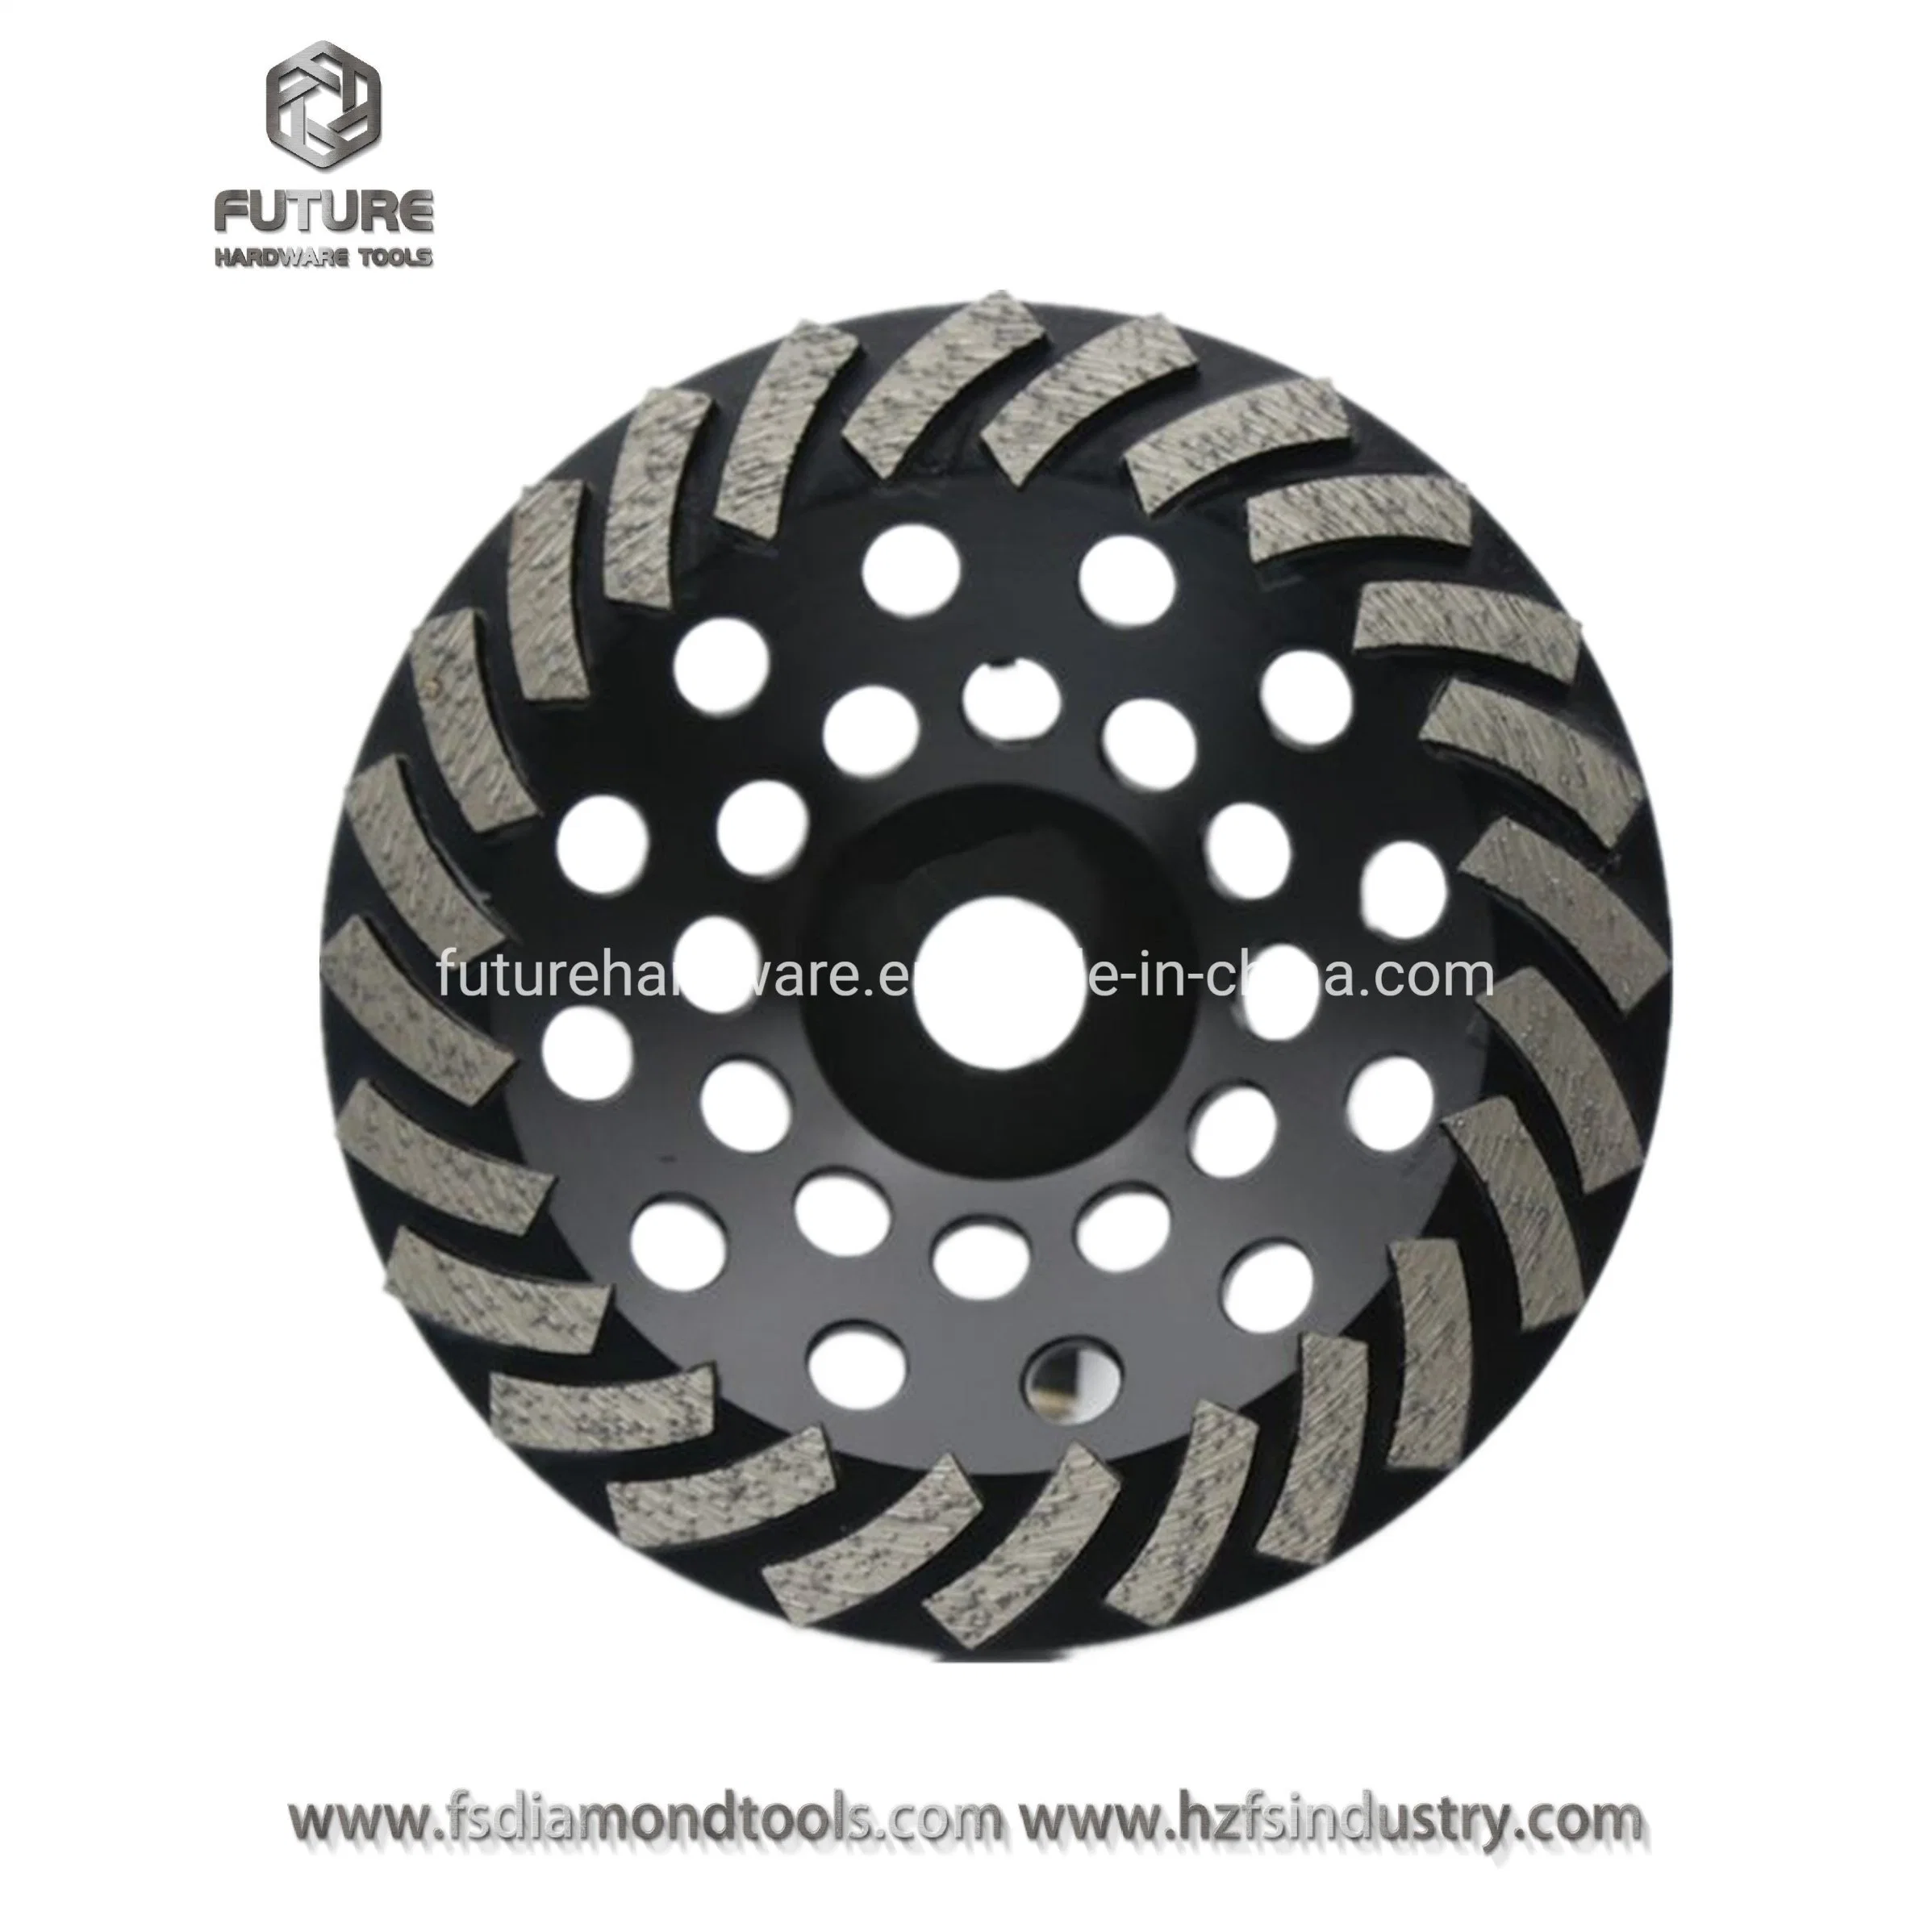 7inch Concrete Grinding Cup Wheel for Angle Grinder